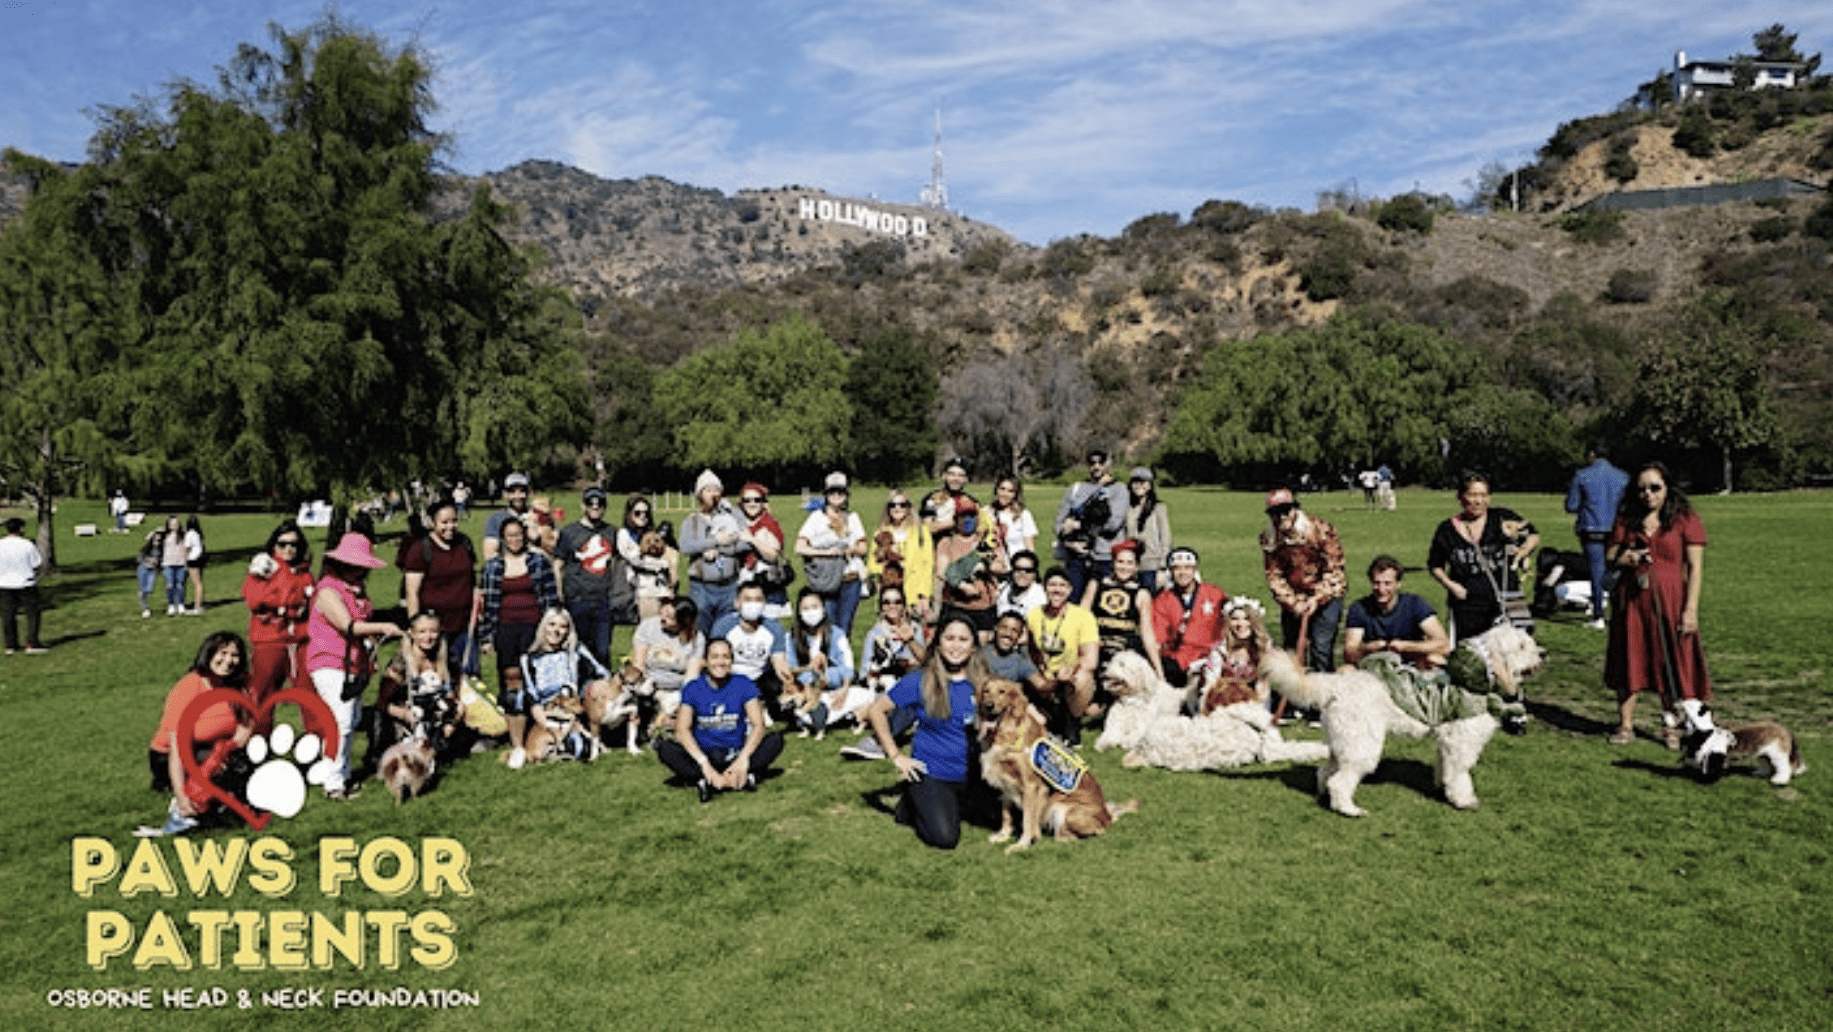 group of people and dogs in costumes posing on the grass with the Hollywood sign in the background